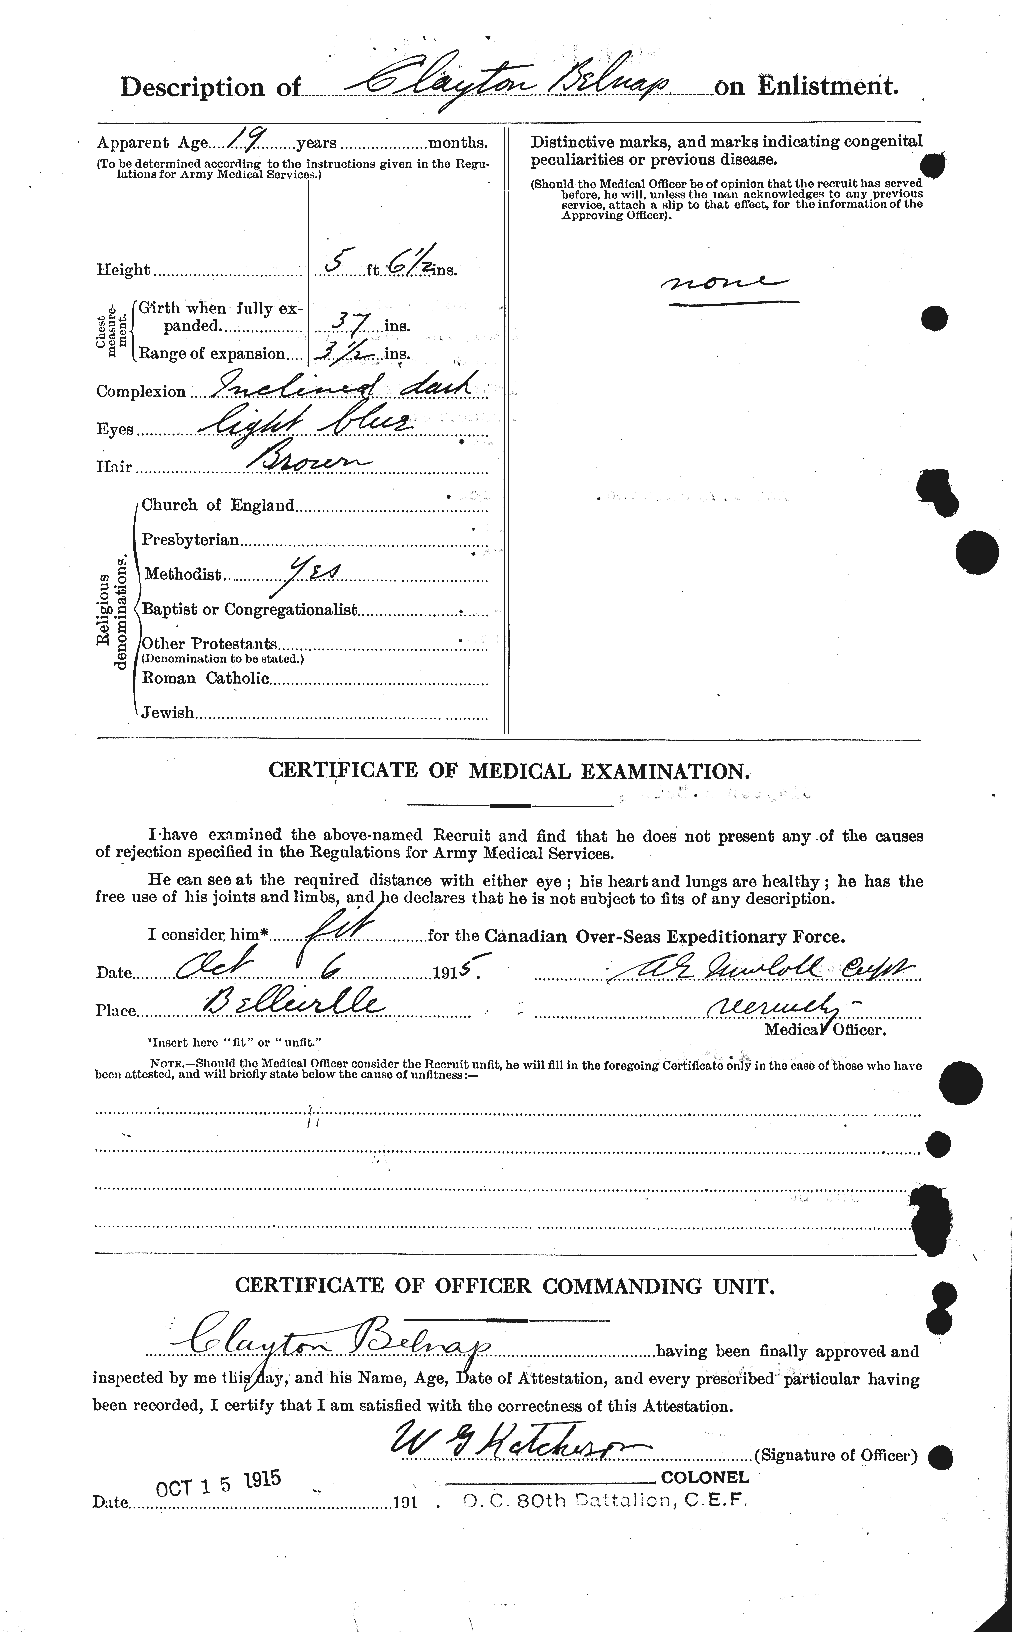 Personnel Records of the First World War - CEF 233593b